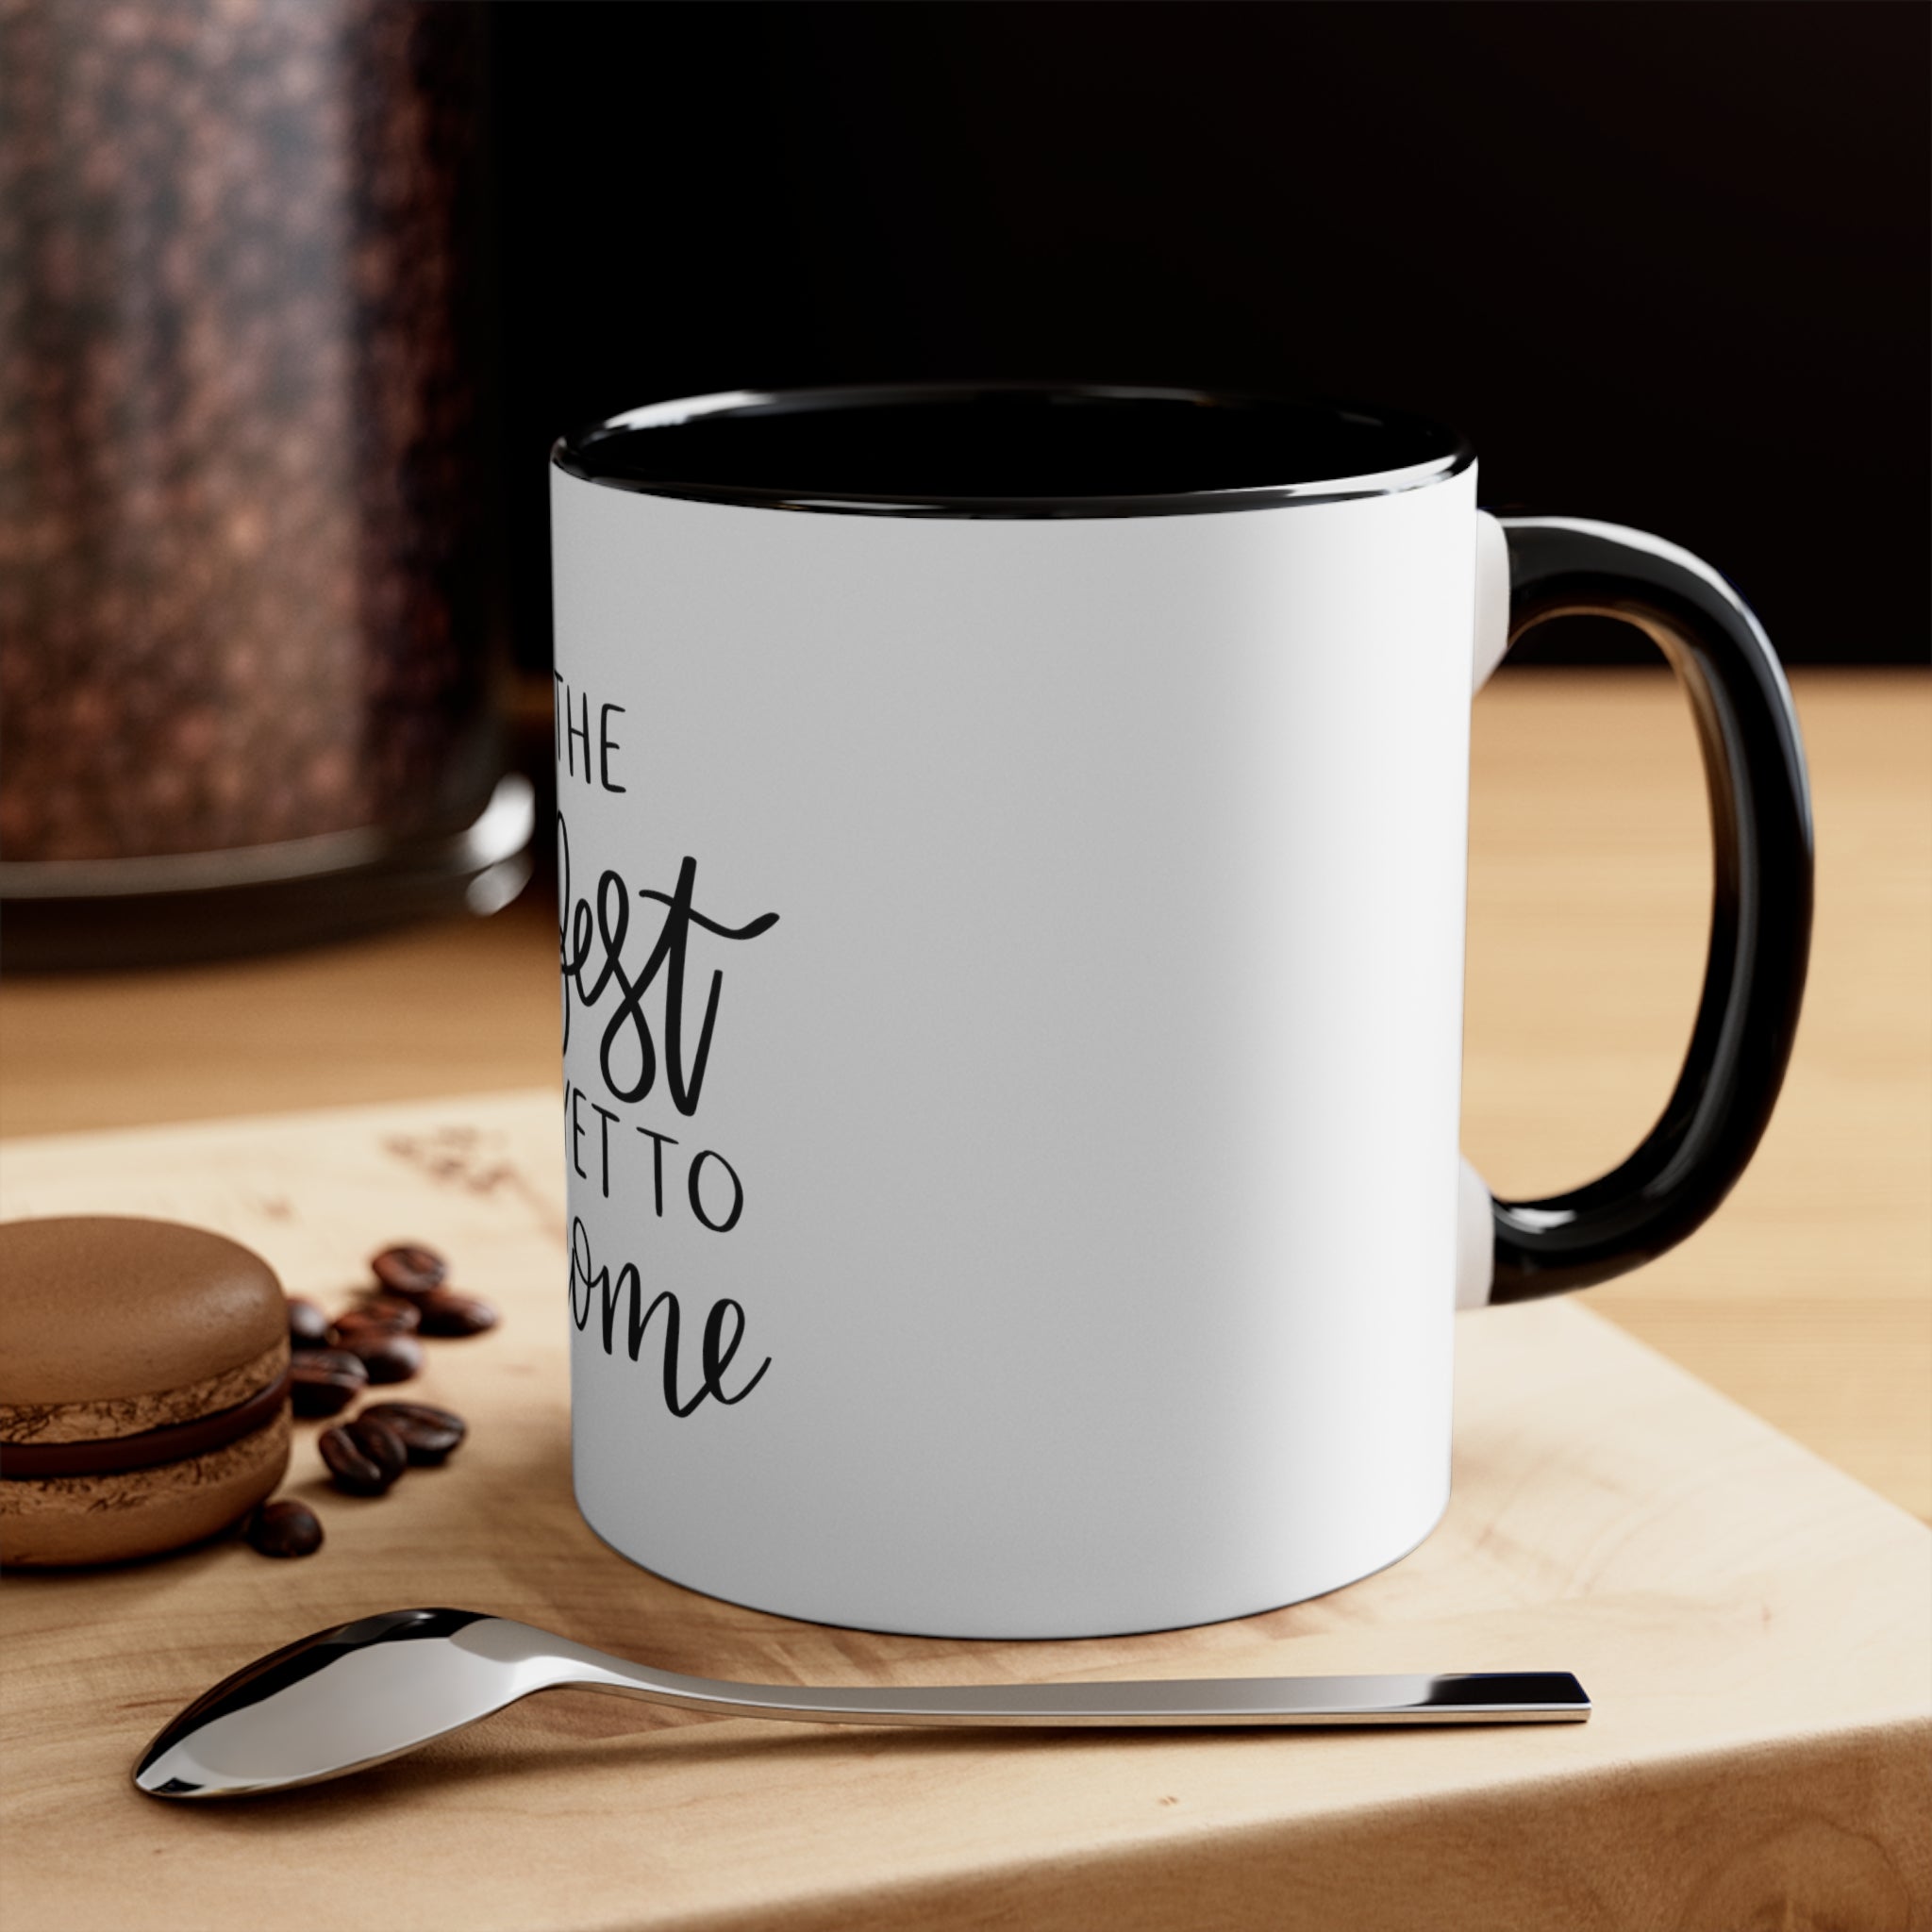 The Best Is Yet To Come Accent Coffee Mug, 11oz